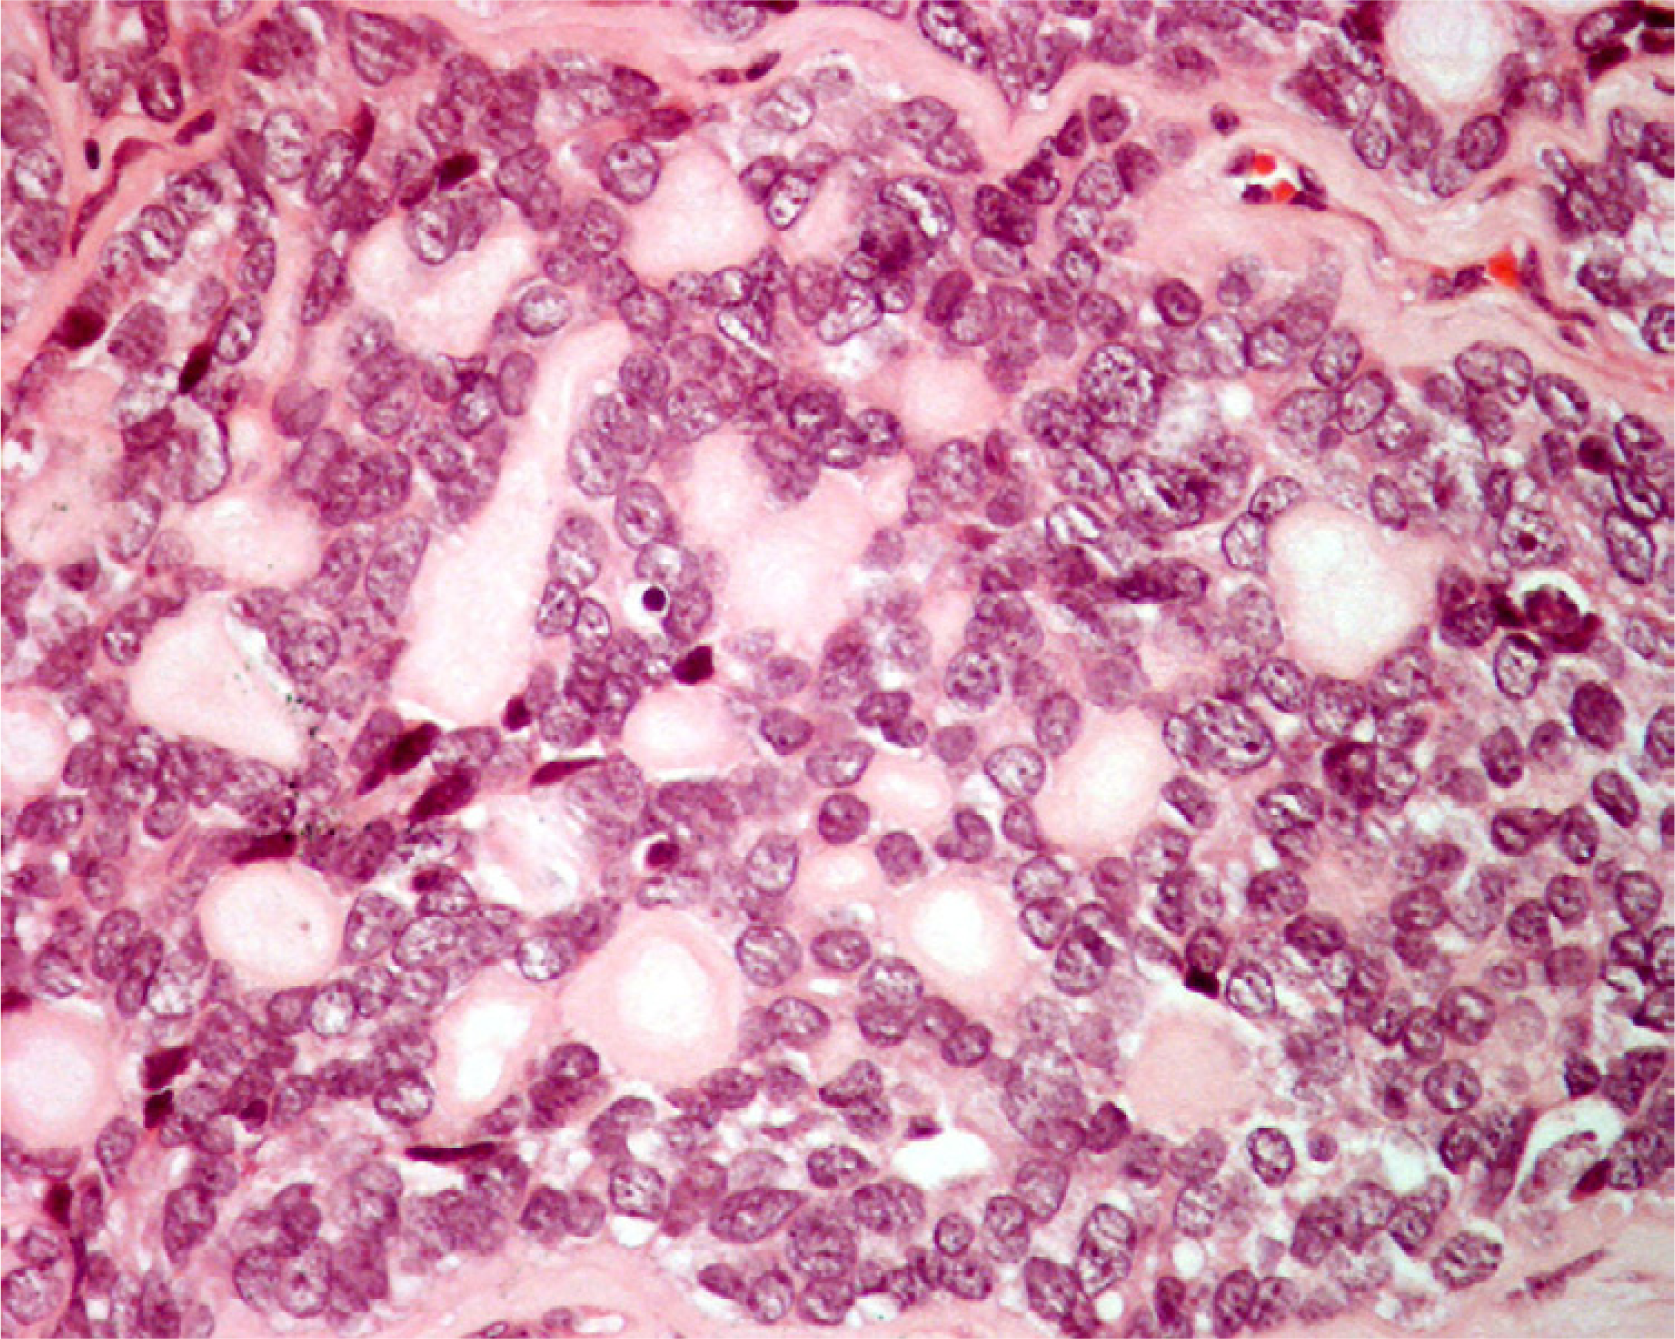 Histology of an adenoid cystic carcinoma metastatic to the thyroid in patient 2 shows small cells surrounding round spaces containing pale, slightly basophilic material (hematoxylin and eosin, × 250).